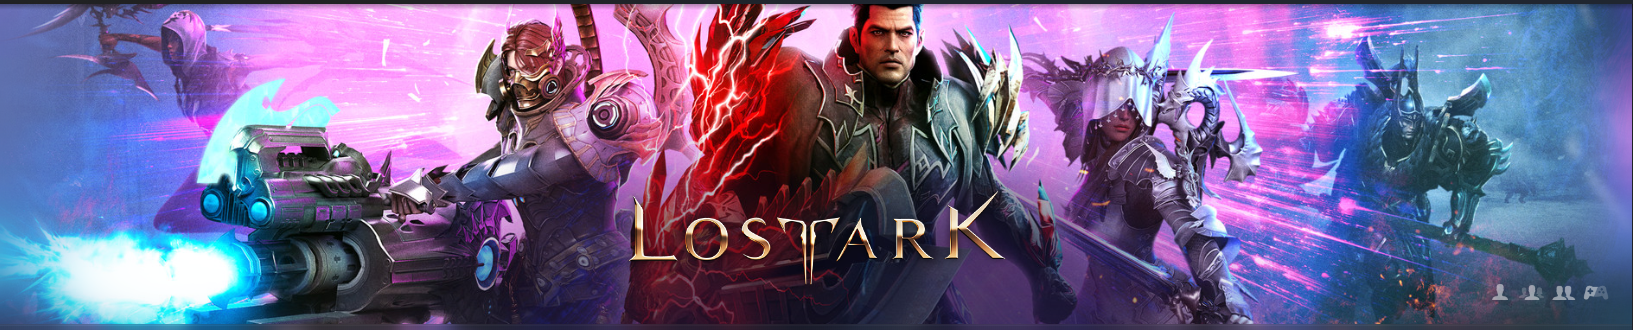 How to Fix Lost Ark Unavailable in Your Region on Steam